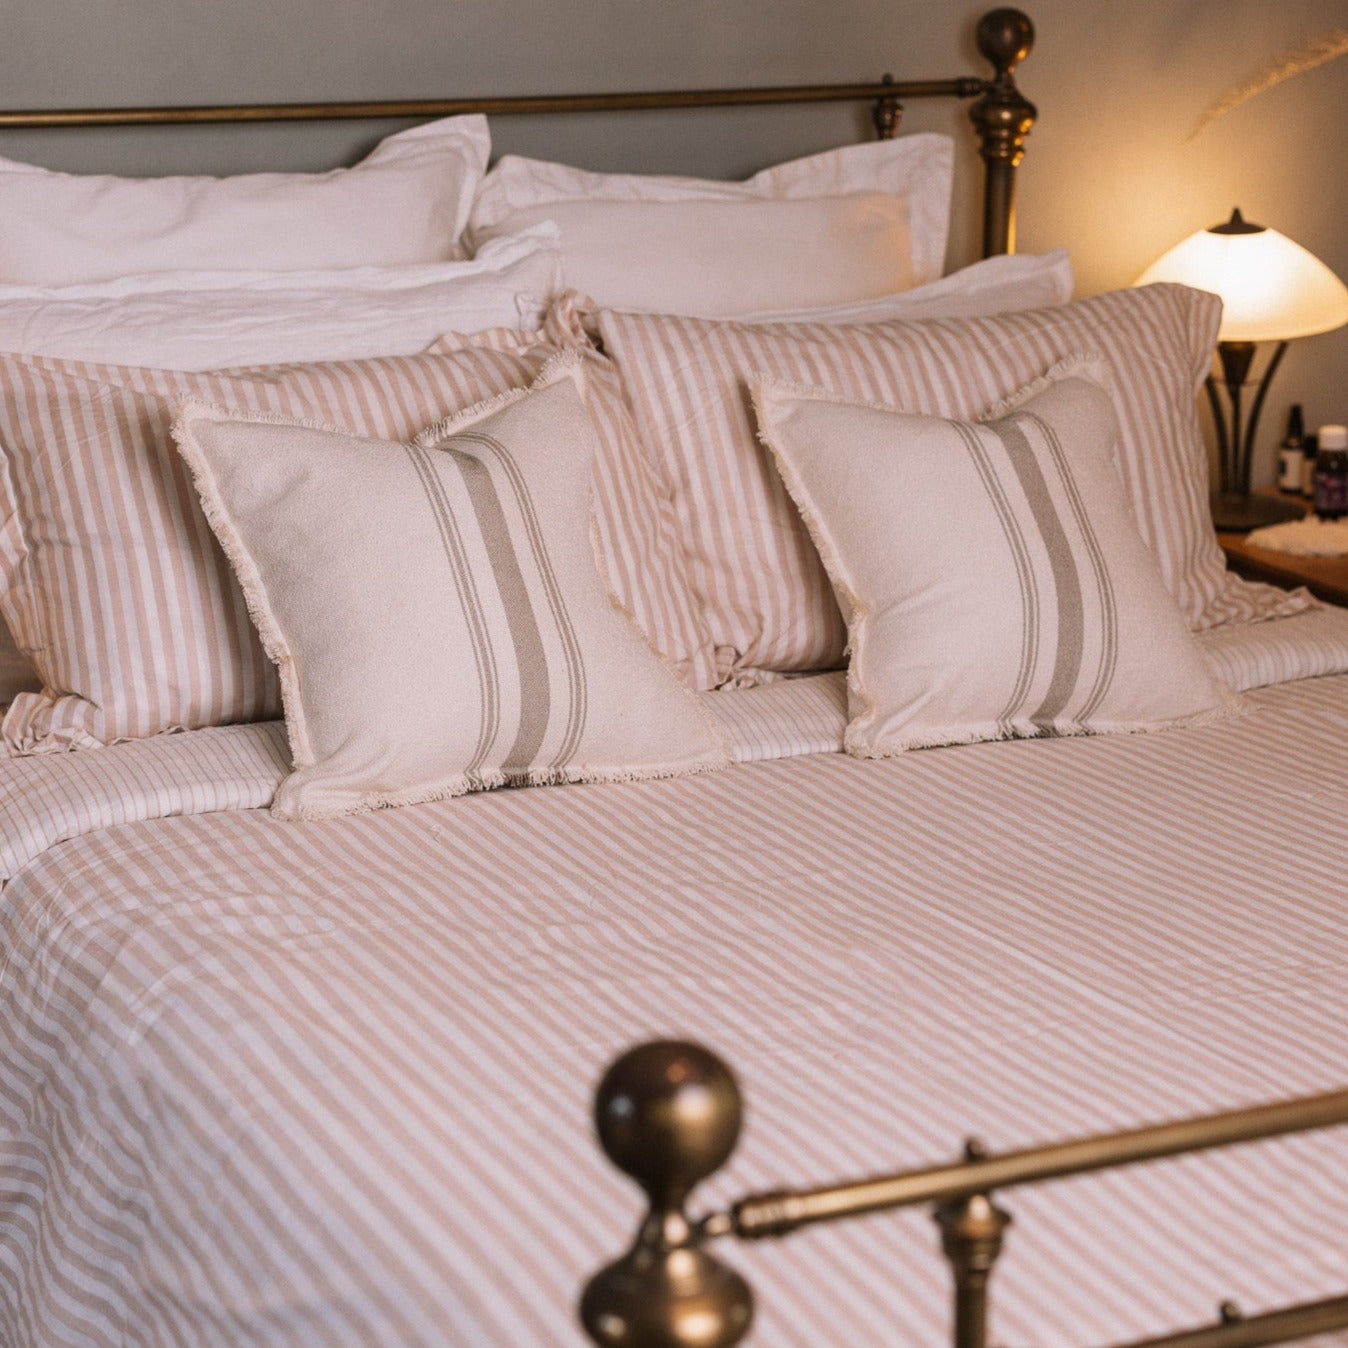 Blush pink striped bedding in a neutral bedroom with a brass bed.